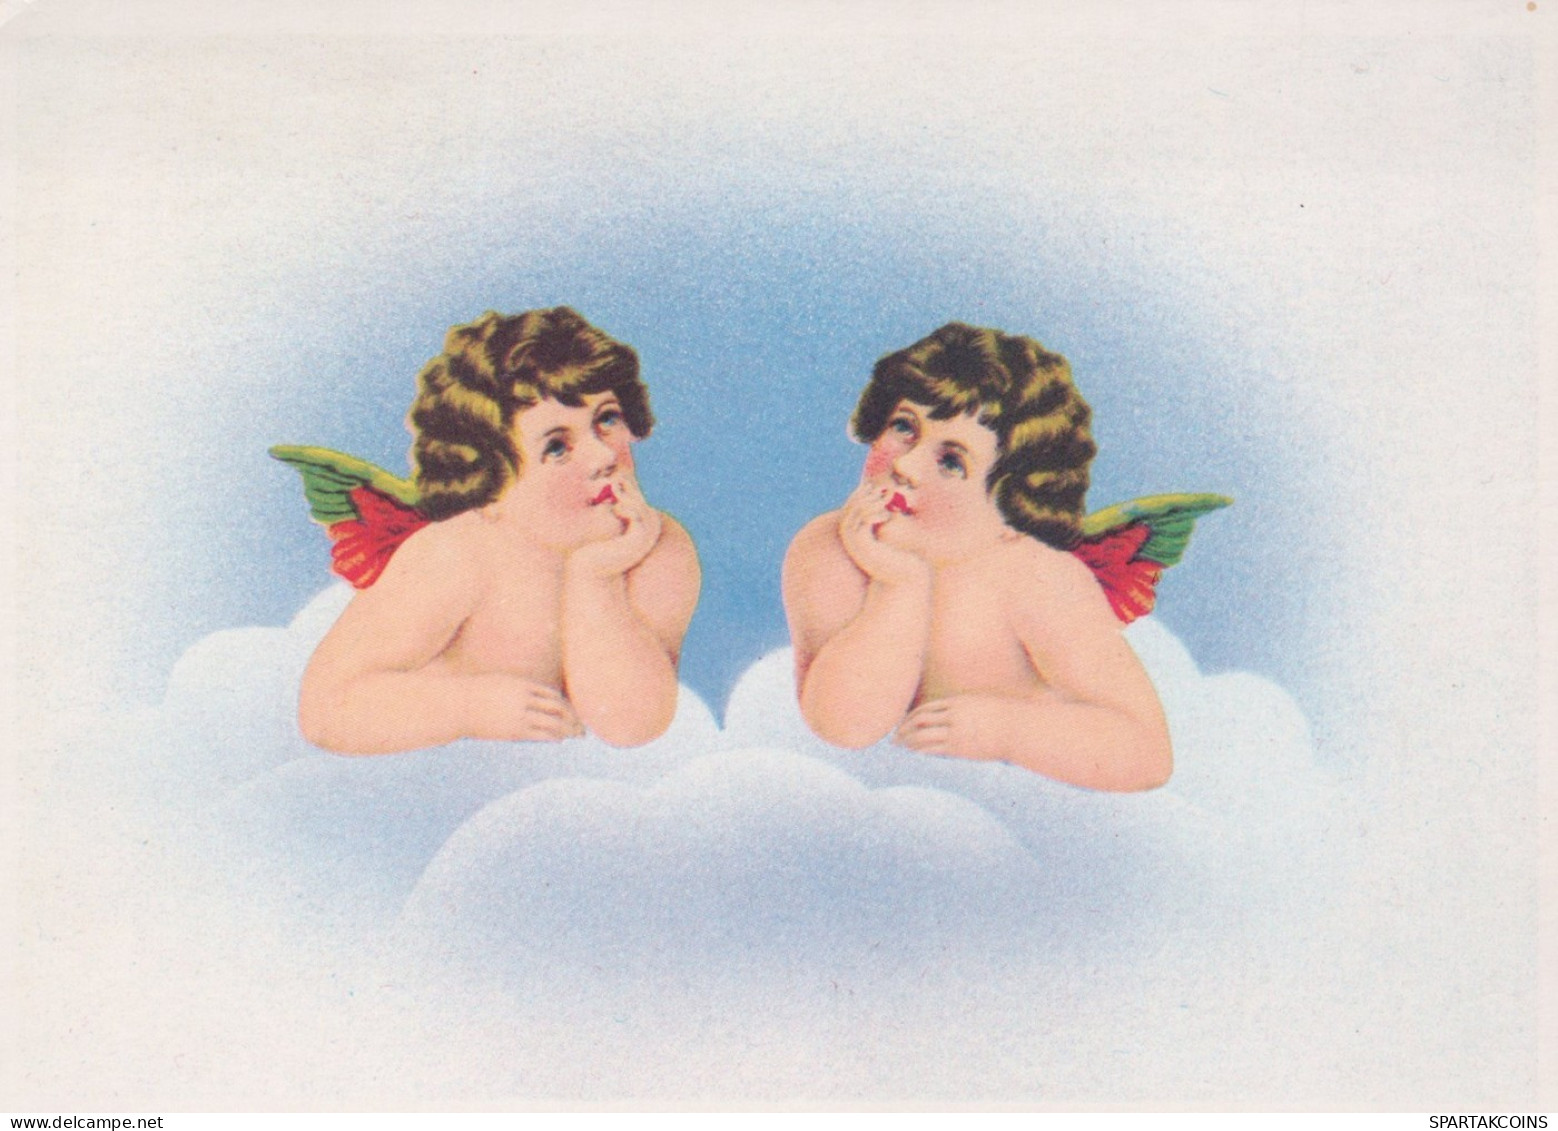 ANGELO Buon Anno Natale Vintage Cartolina CPSM #PAH037.IT - Anges